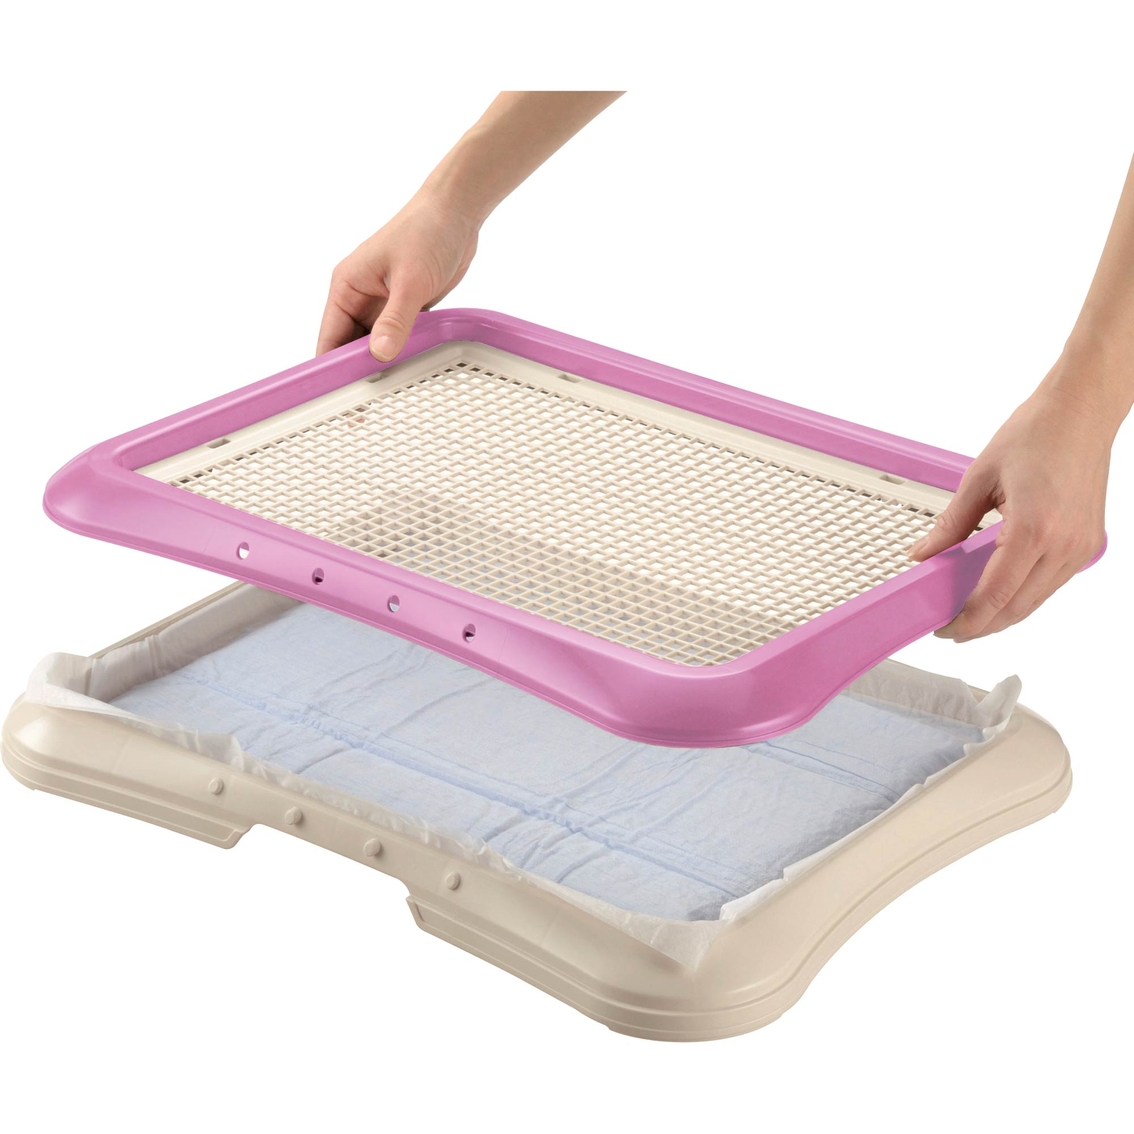 Richell Paw Trax Pink Mesh Training Tray - Image 3 of 4